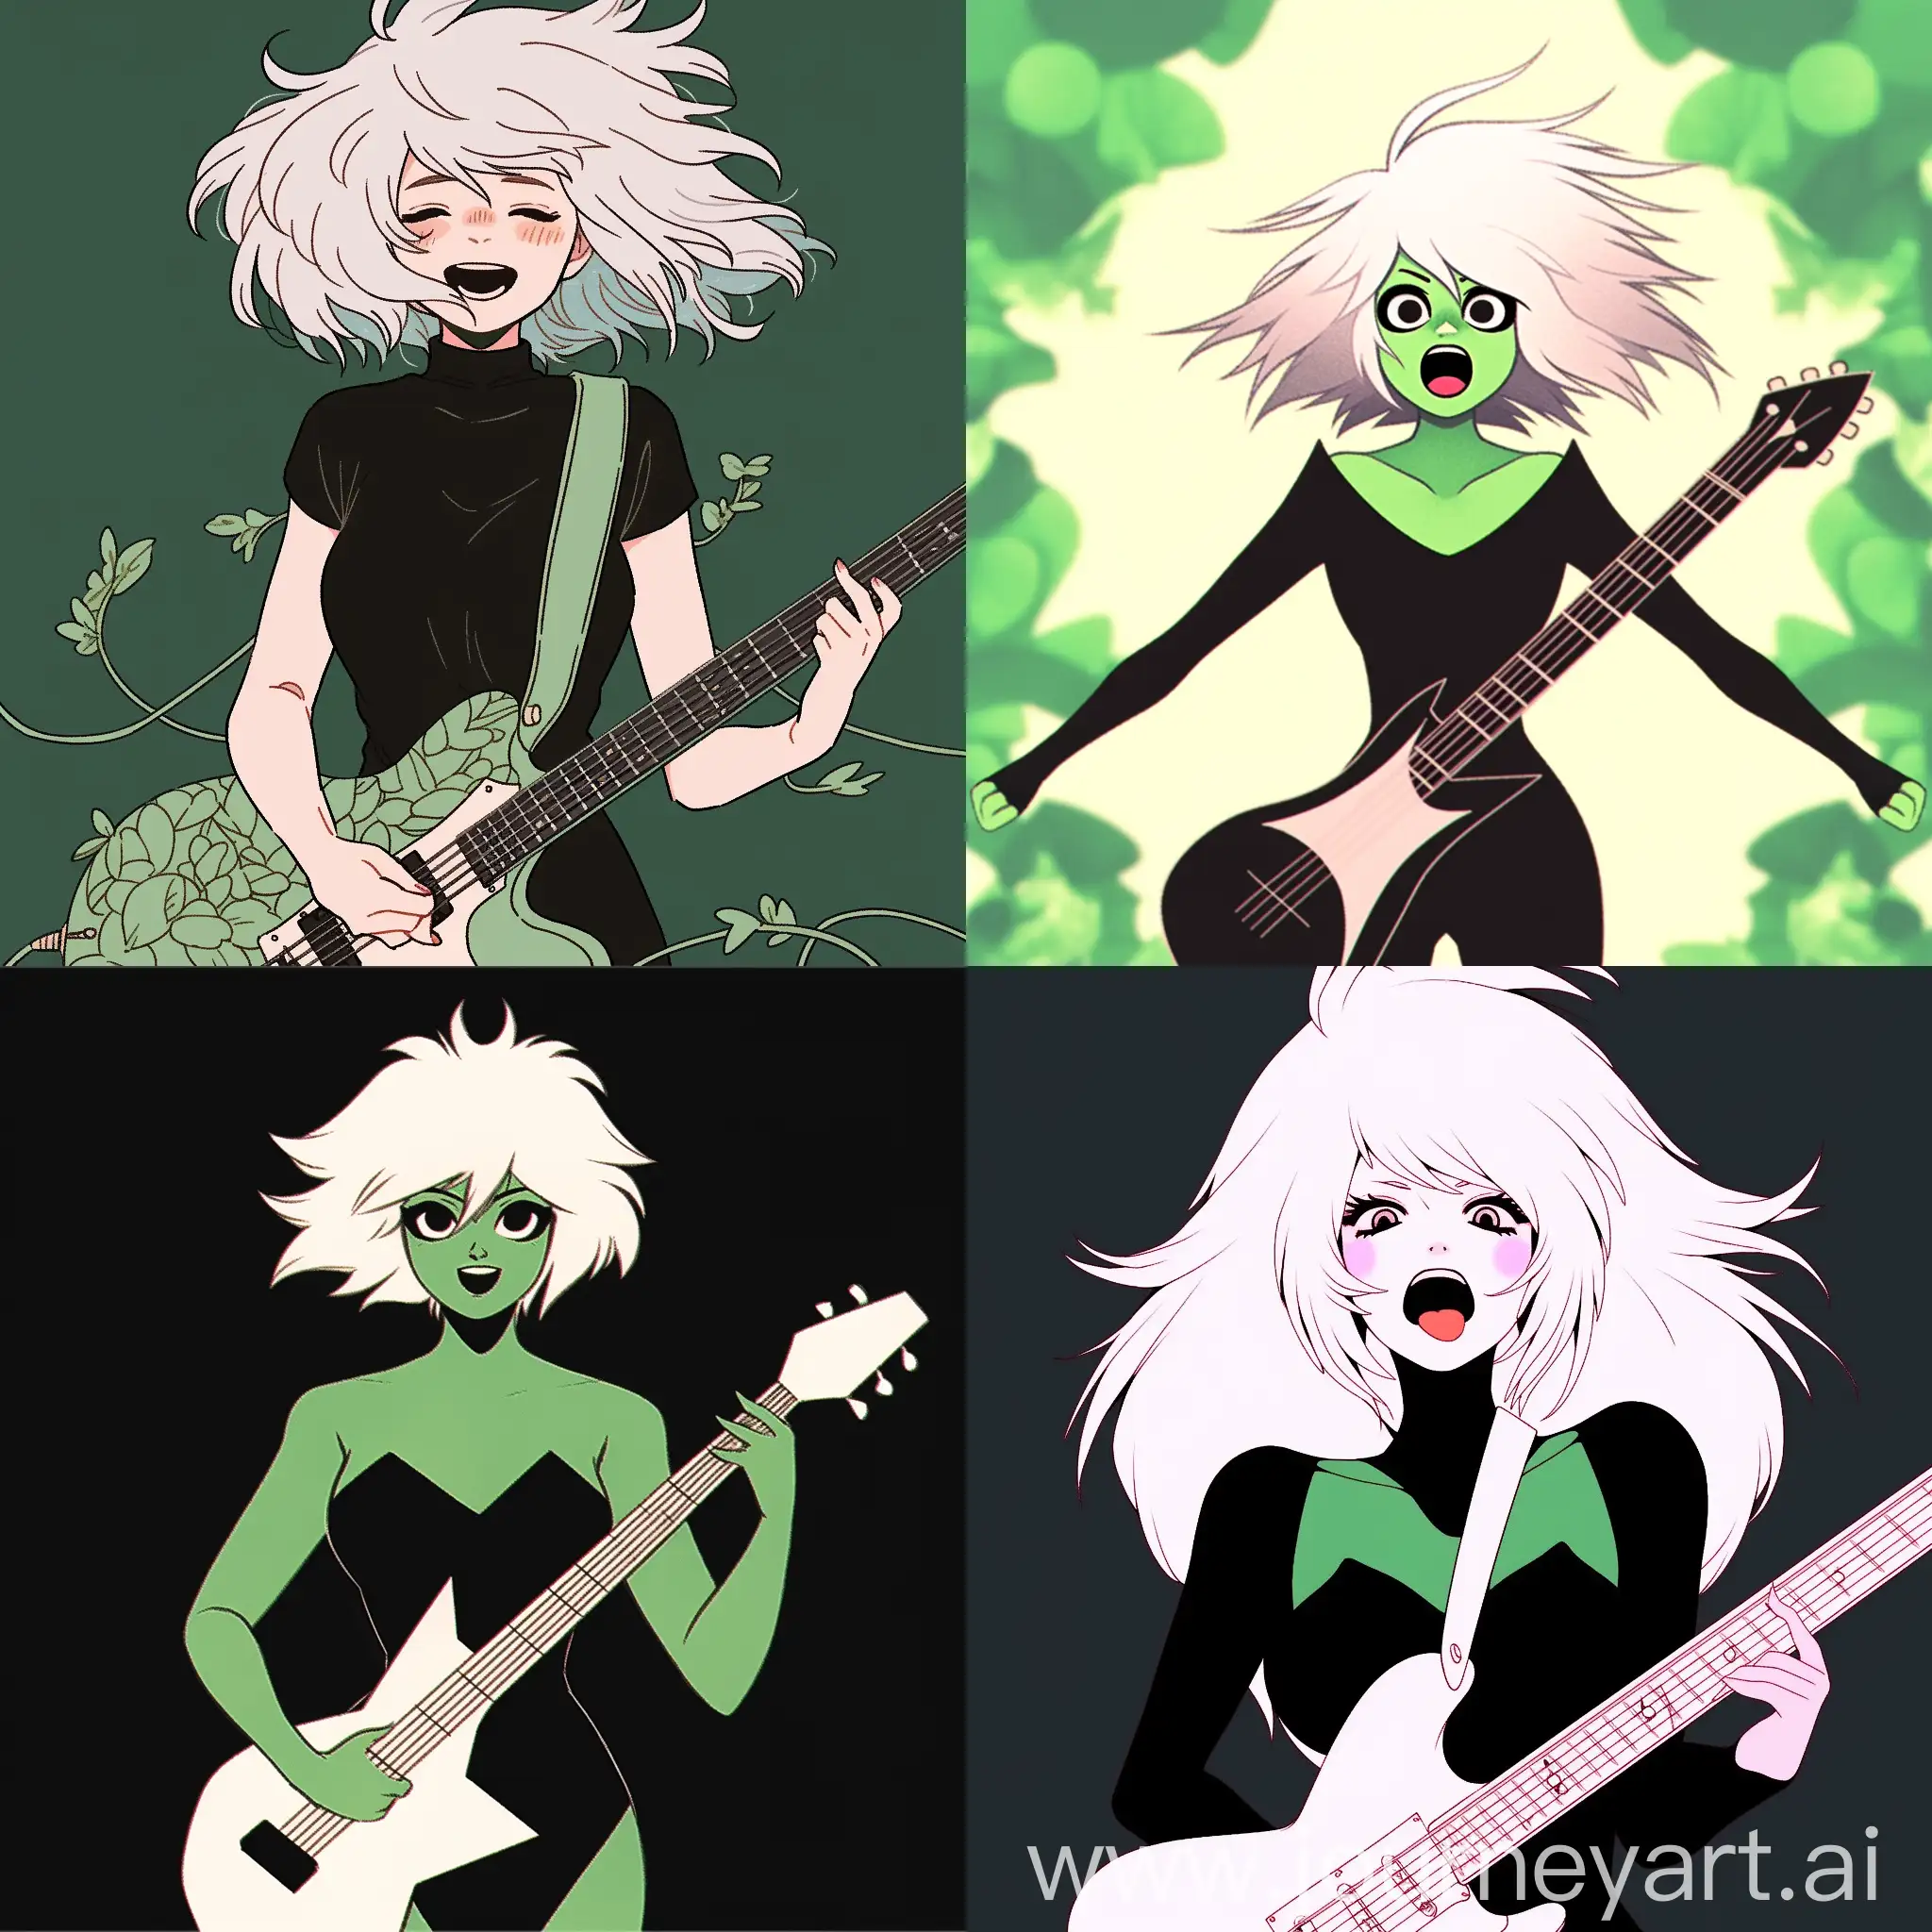 Fierce-WhiteHaired-Woman-Rocking-Out-on-a-Green-Electric-Guitar